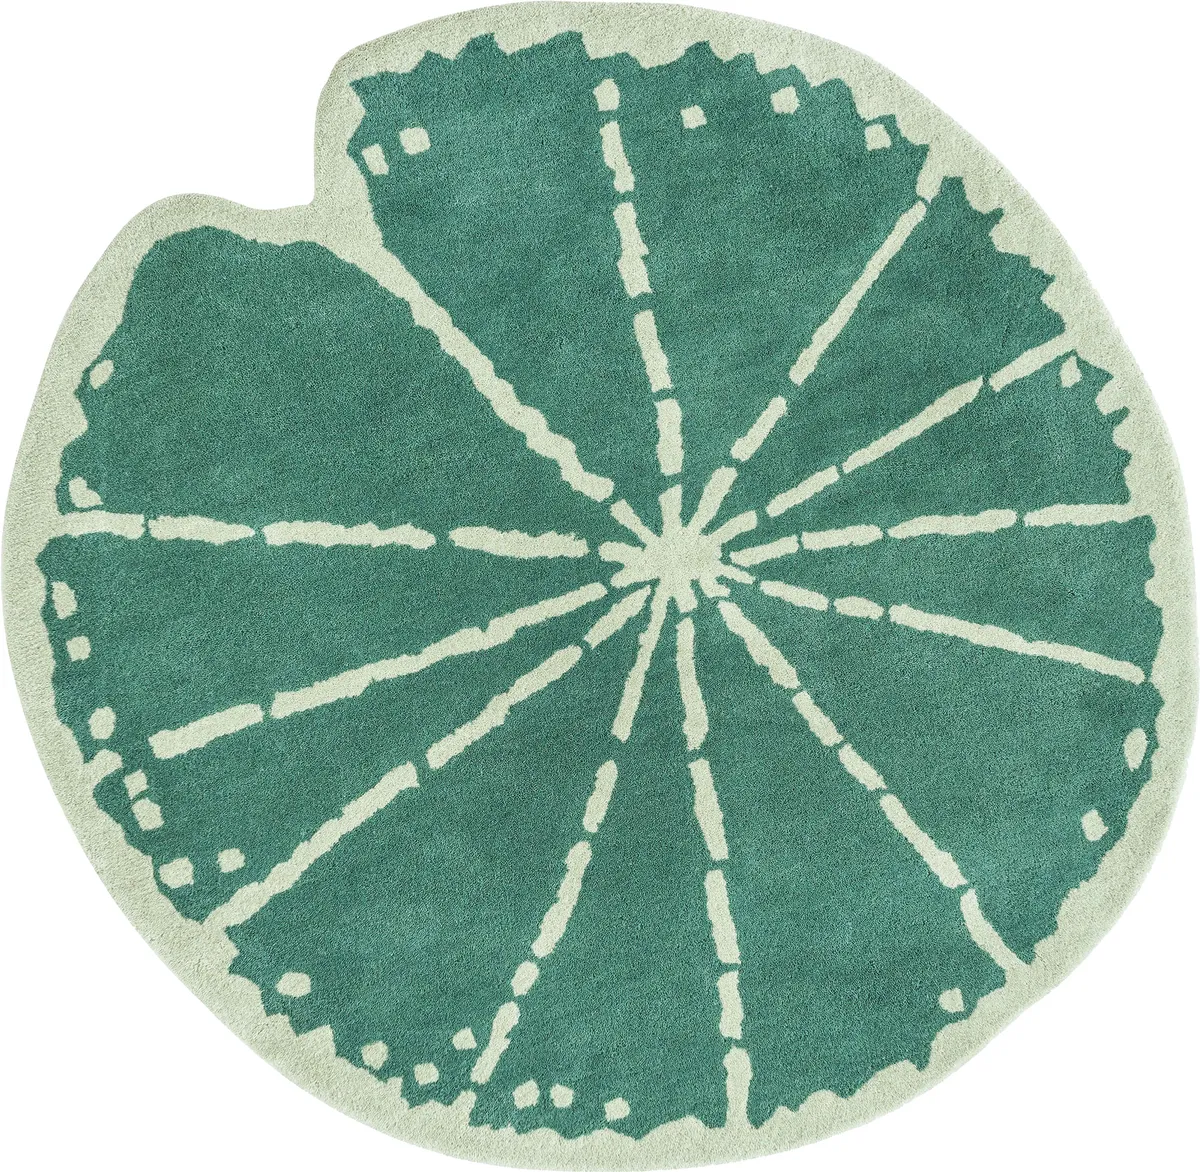 Lily pad rug, £175, Sweetpea & Willow